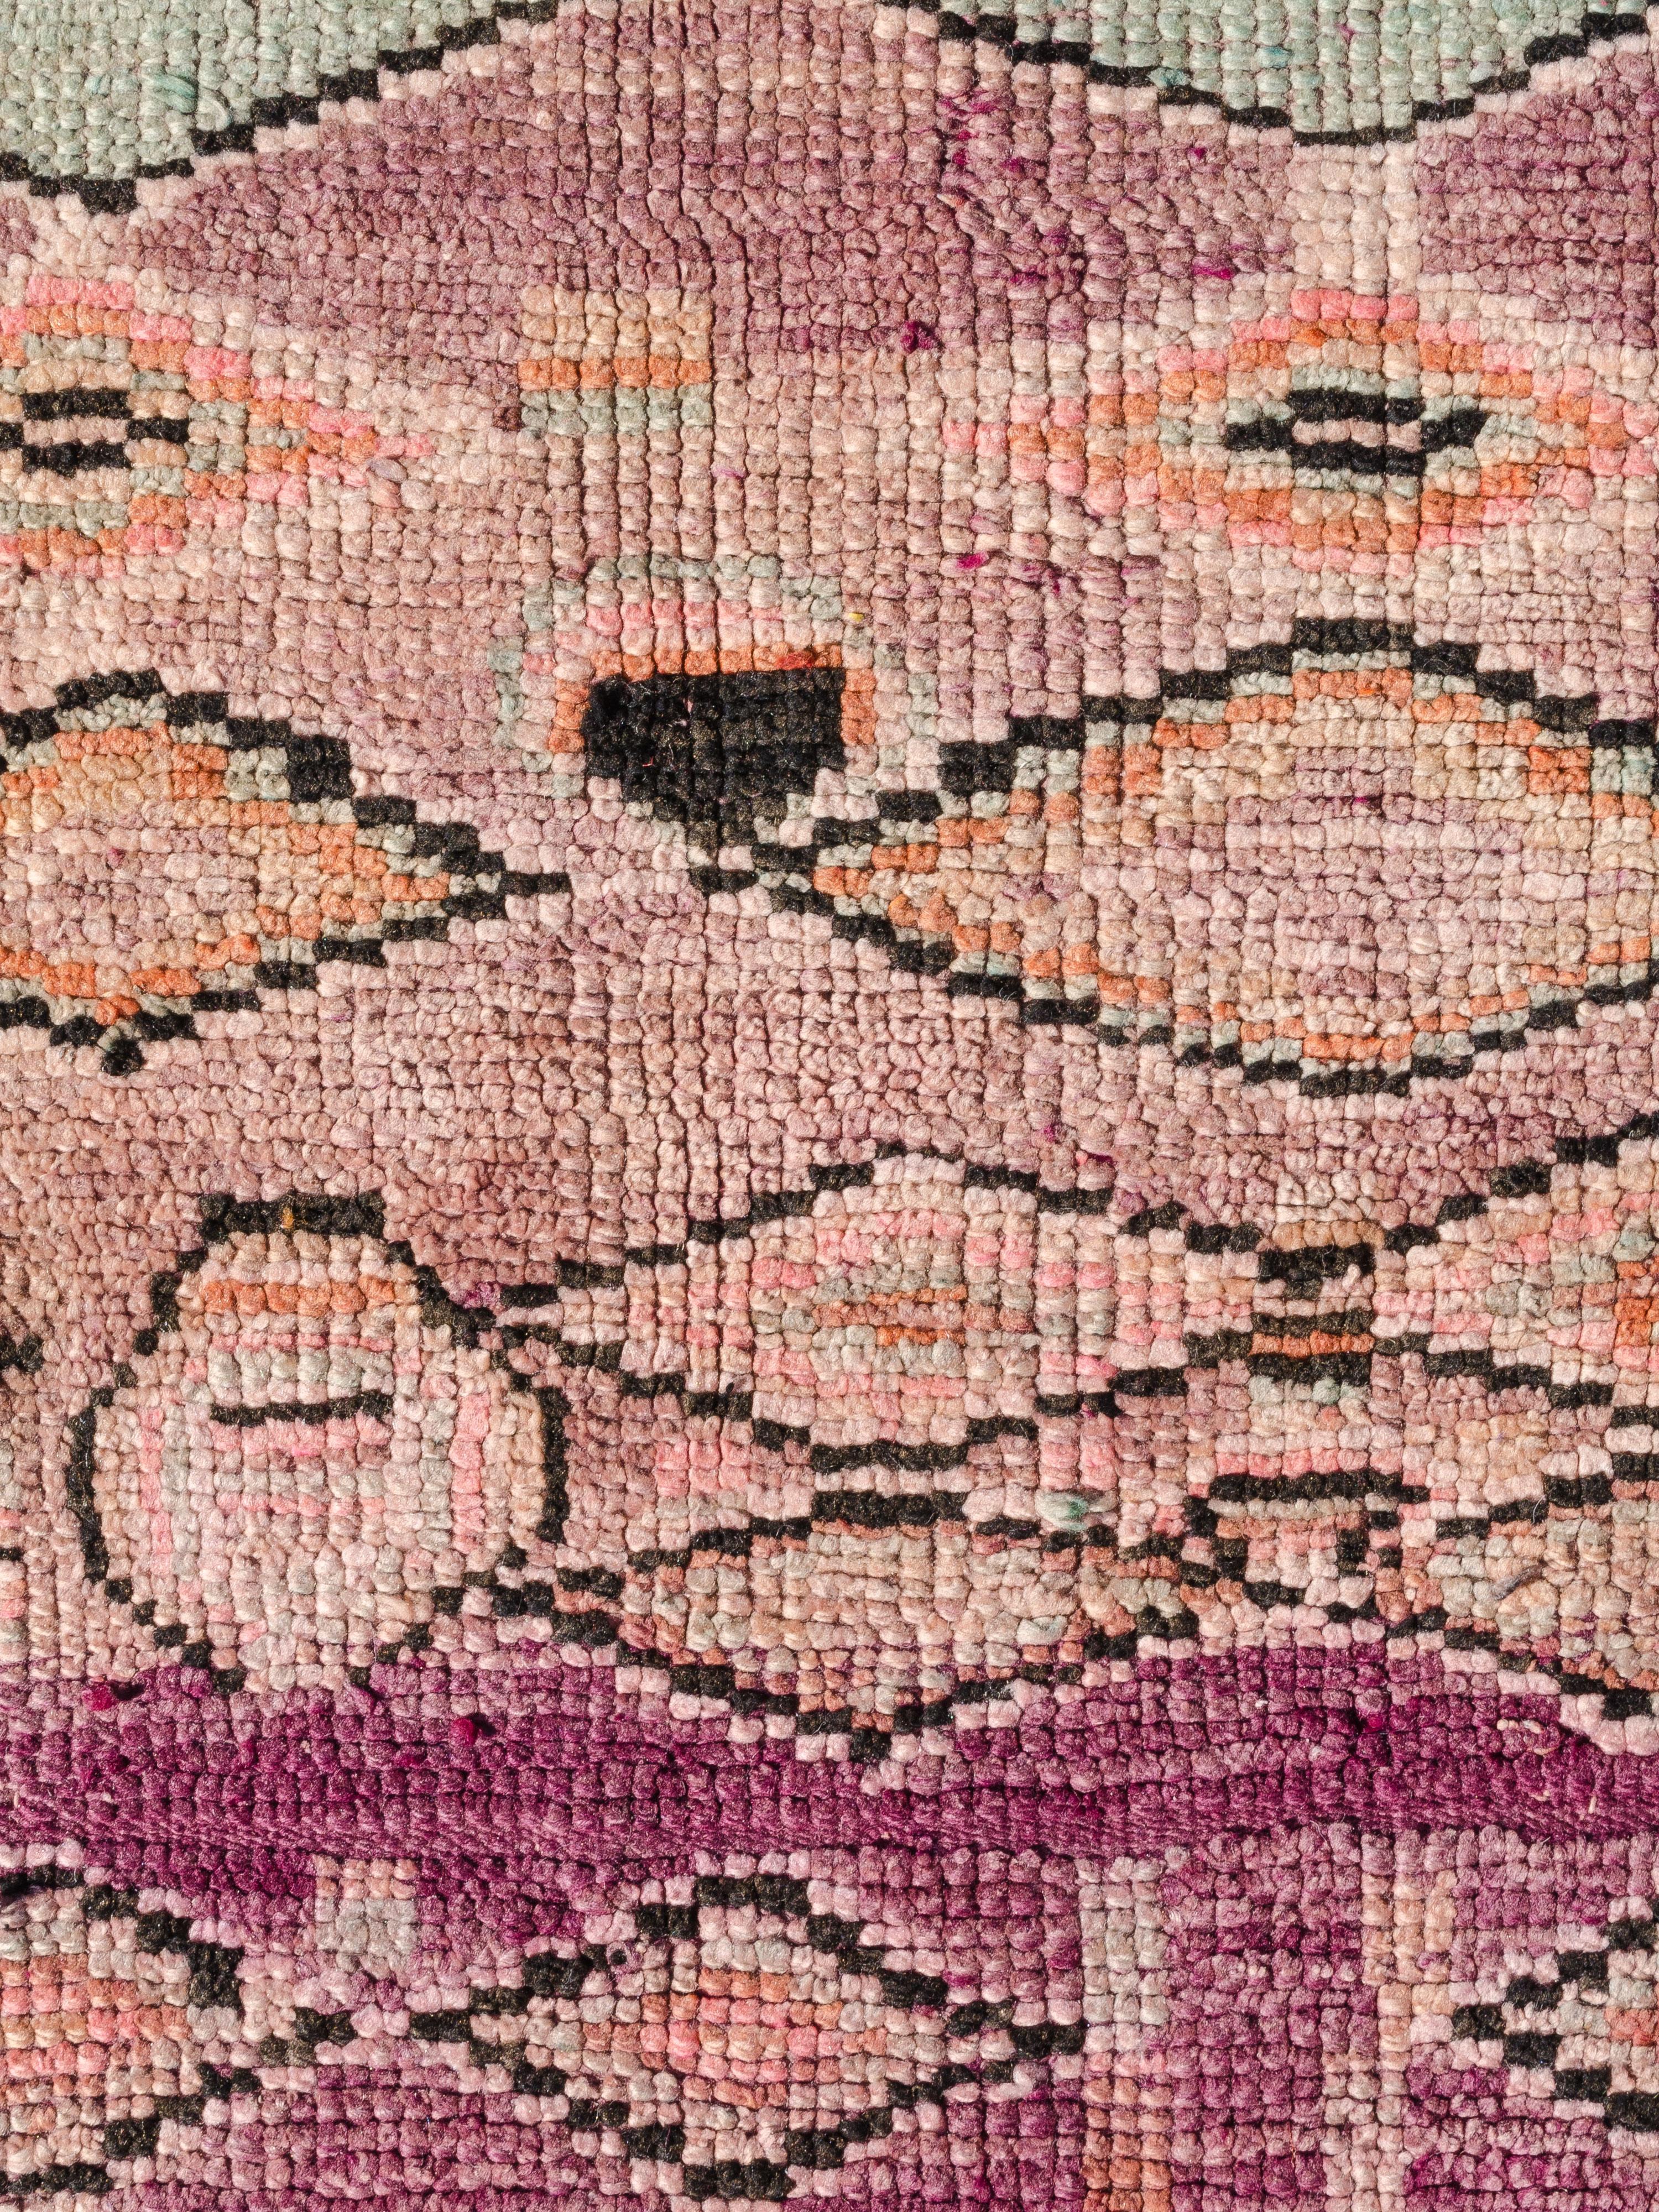 This classic Boujad features vertical and horizontal chains of lozenges floating over an abrashed magenta field. Male bar and rod motifs are randomly placed throughout the composition, adding spontaneity to an otherwise rather structured pattern.